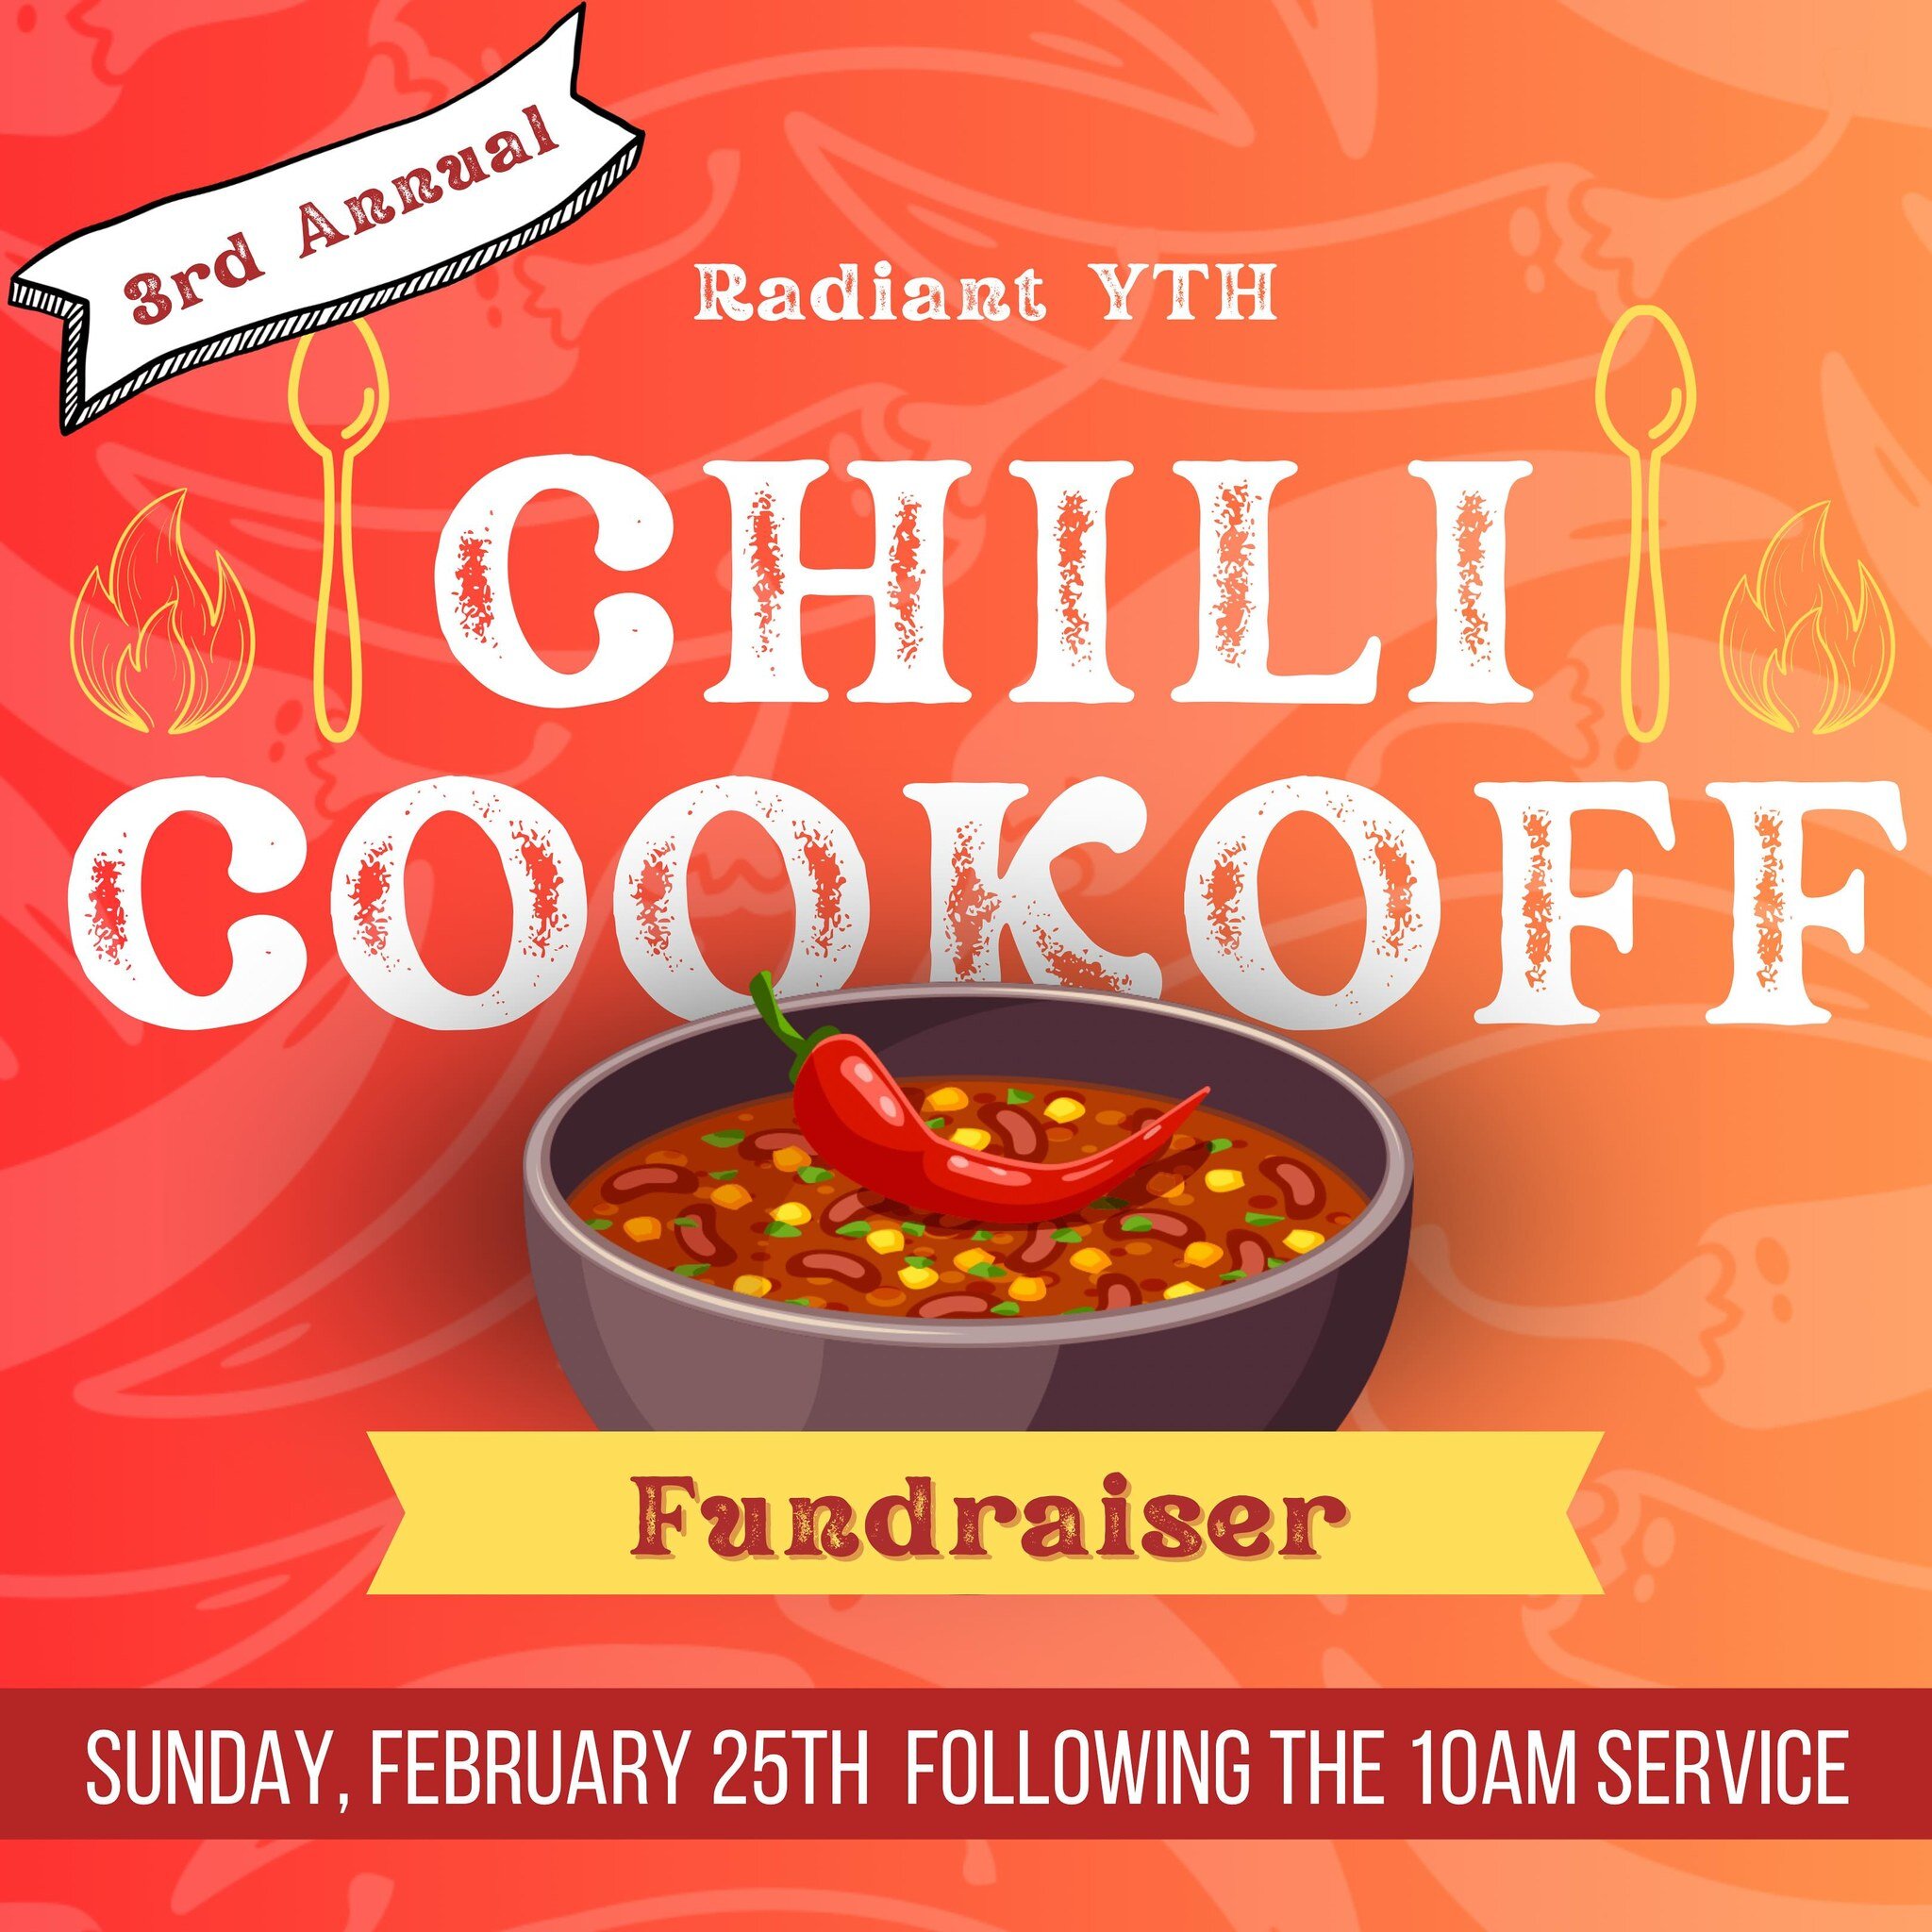 LET&rsquo;S GET COOKIN!  Our third annual Chili Cookoff camp fundraising is THIS SUNDAY! Following the 10am service at the Canton Campus, we&rsquo;ll be judging and serving up some of the best chili around! Entry fee per recipe is $20 and will help s